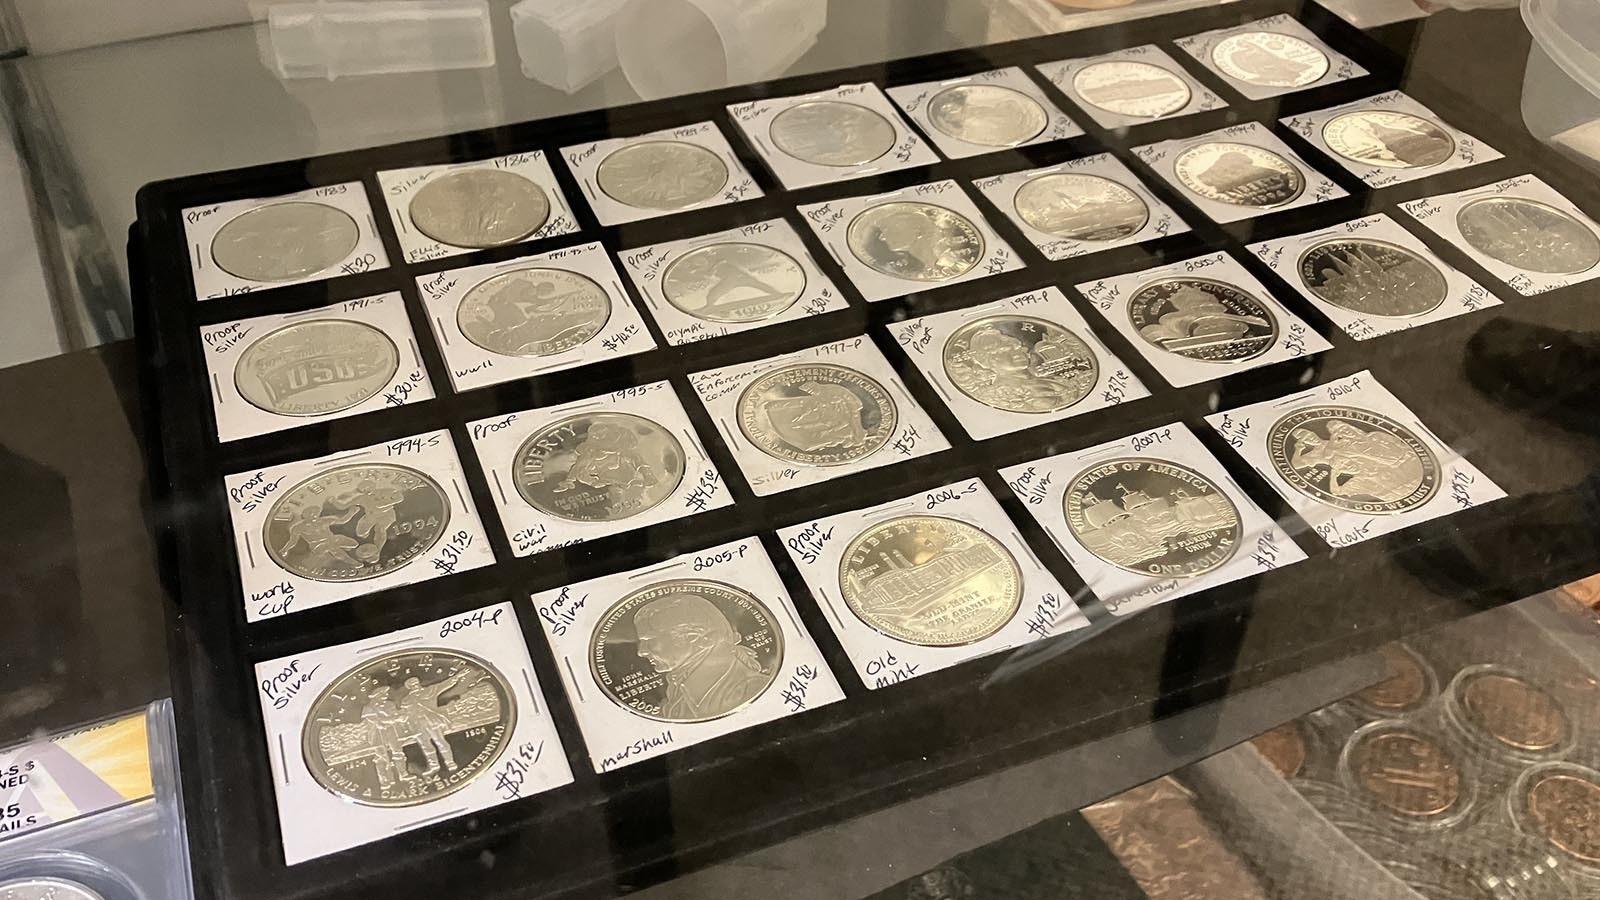 One-ounce silver proofs created for collectors are available with many choices.